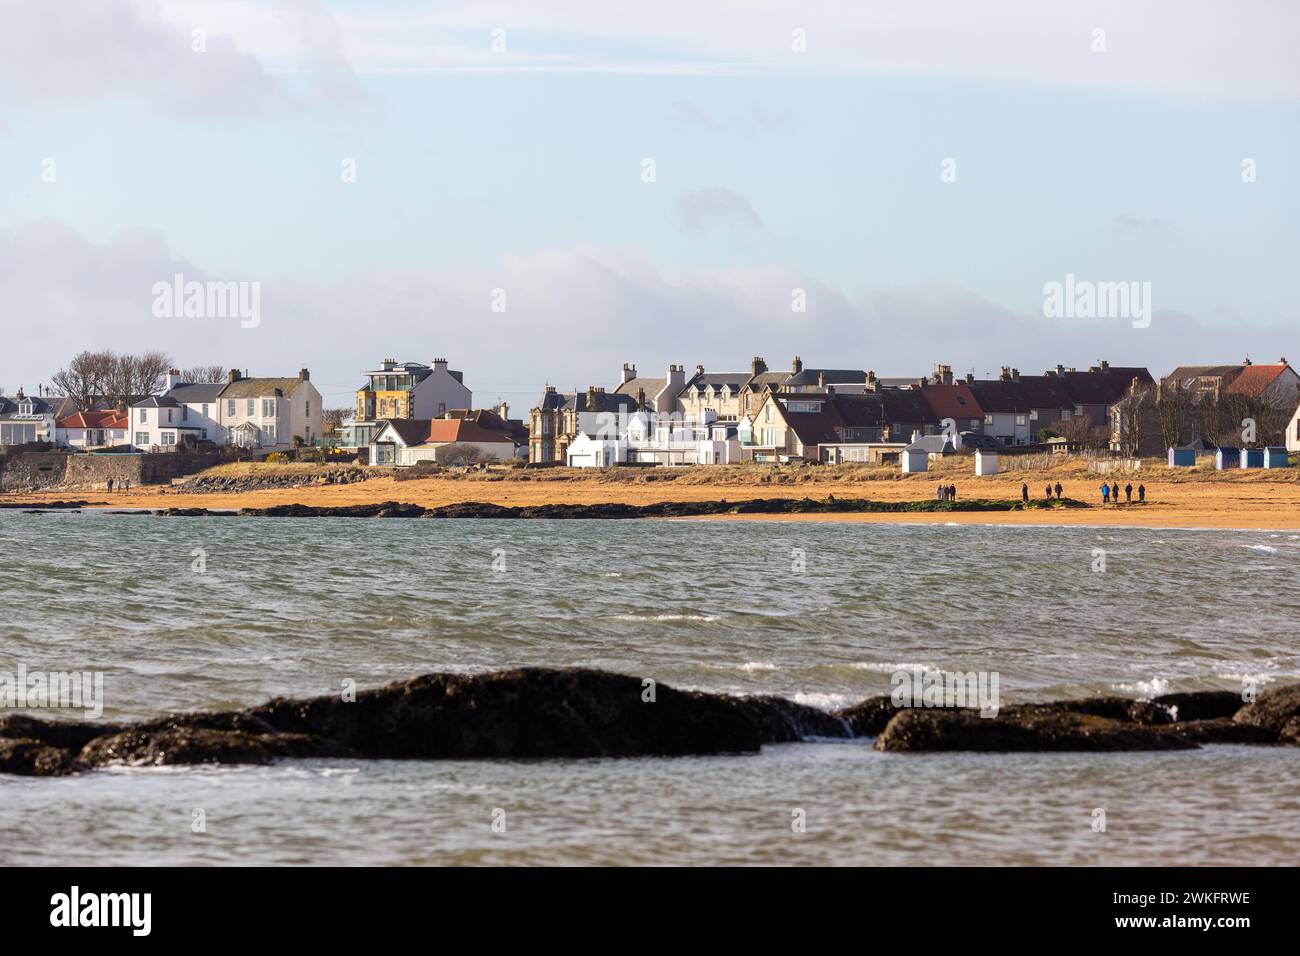 Seafront houses in Elie Scotland Stock Photo